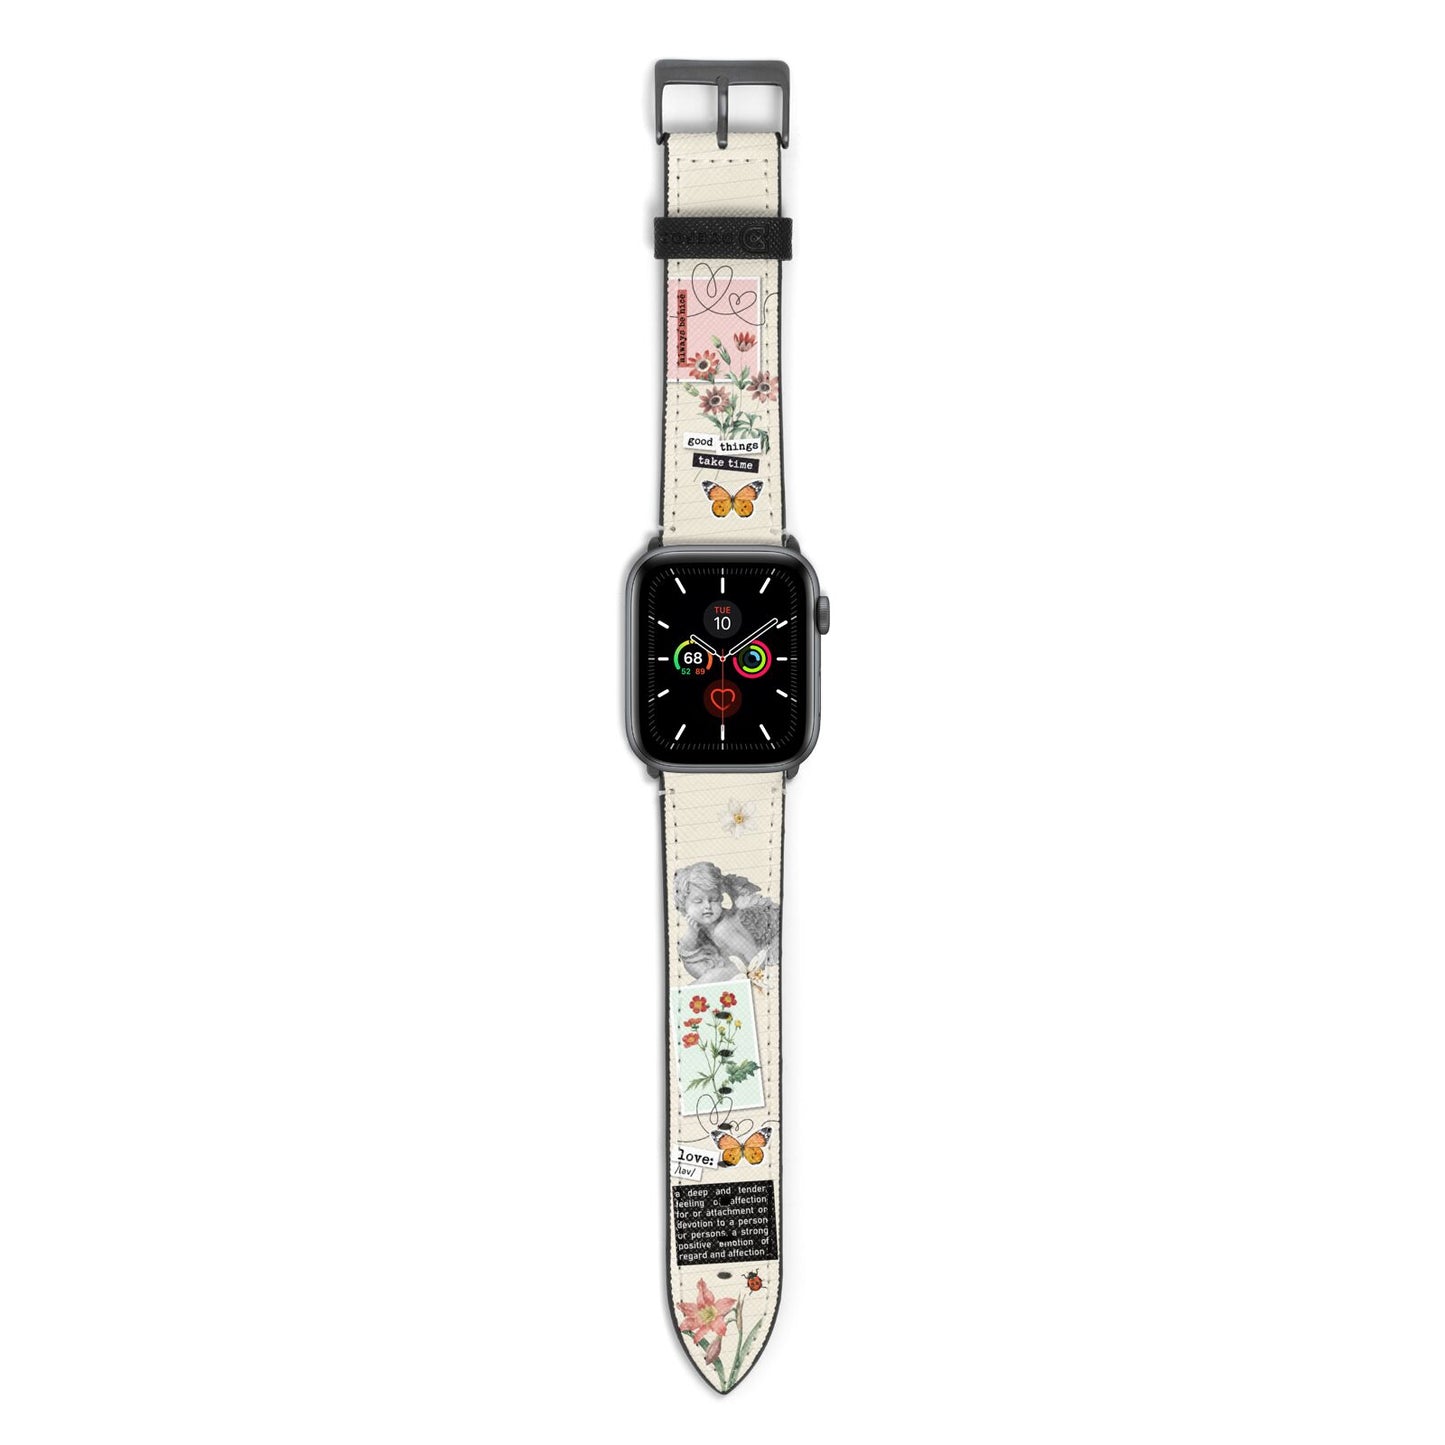 Vintage Love Collage Apple Watch Strap with Space Grey Hardware